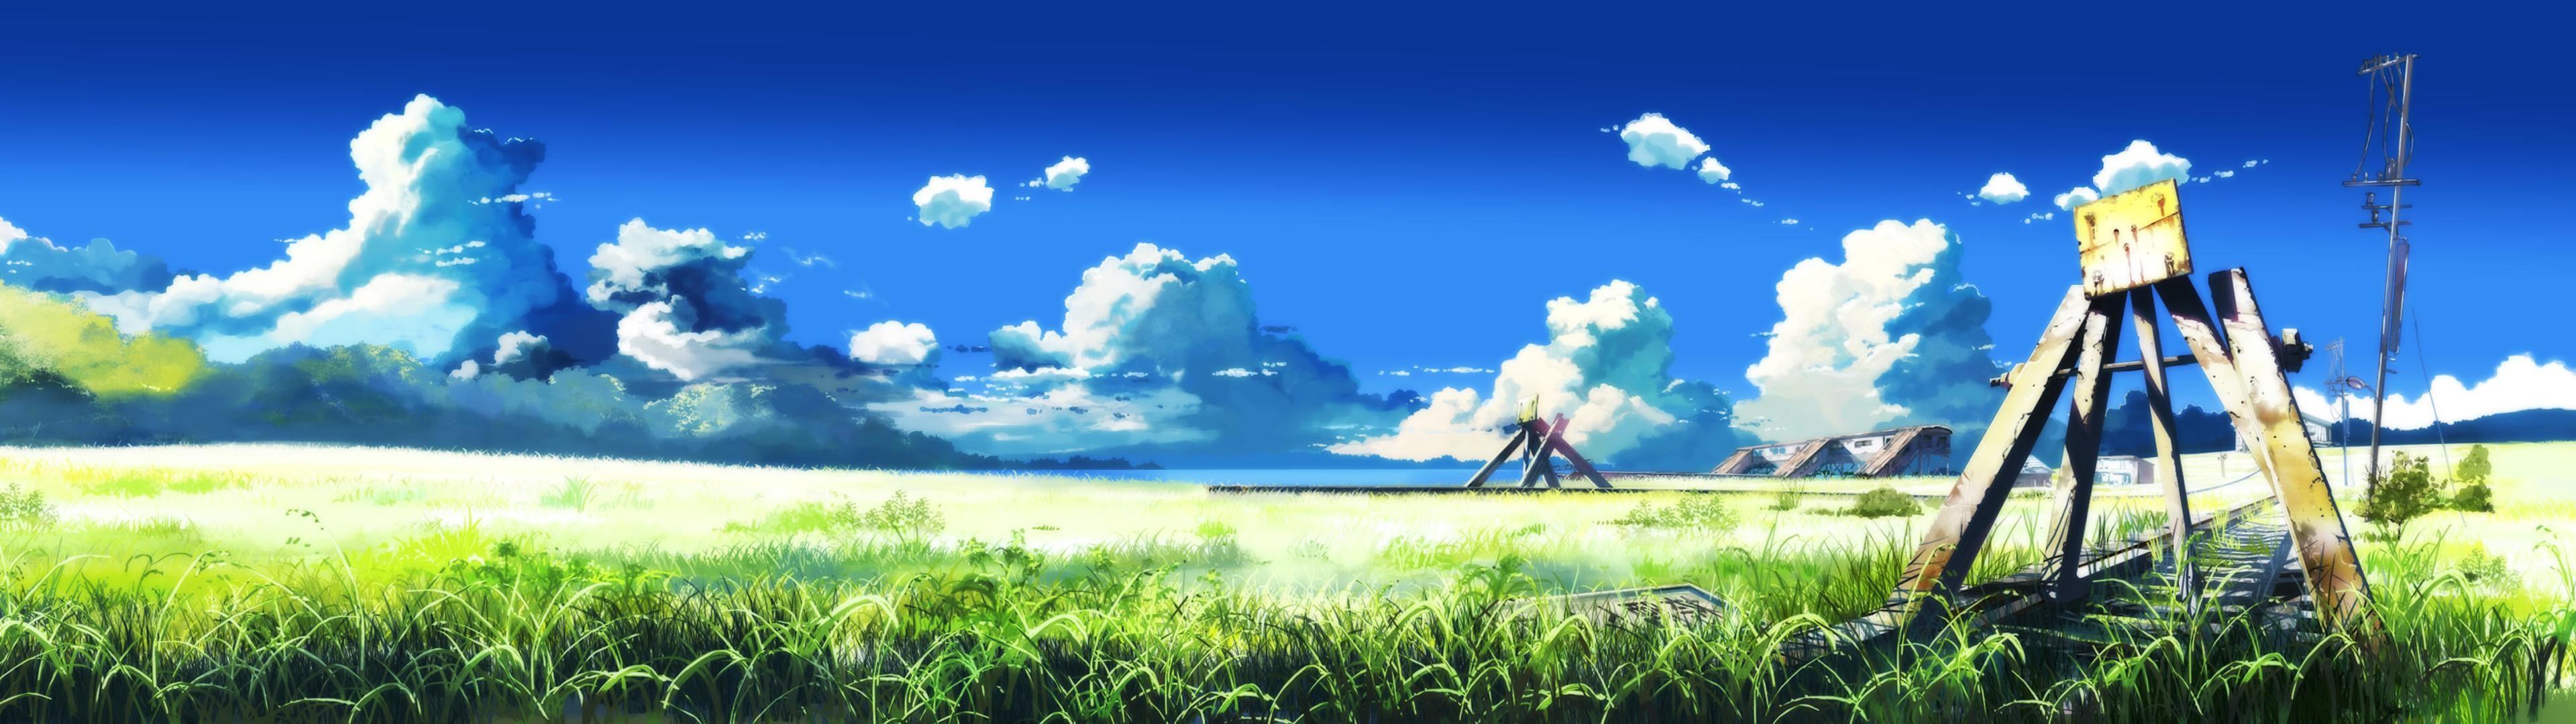 3840 x 1080 · jpeg - Dual Monitor wallpaper Anime 1 Download free awesome wallpapers for ...